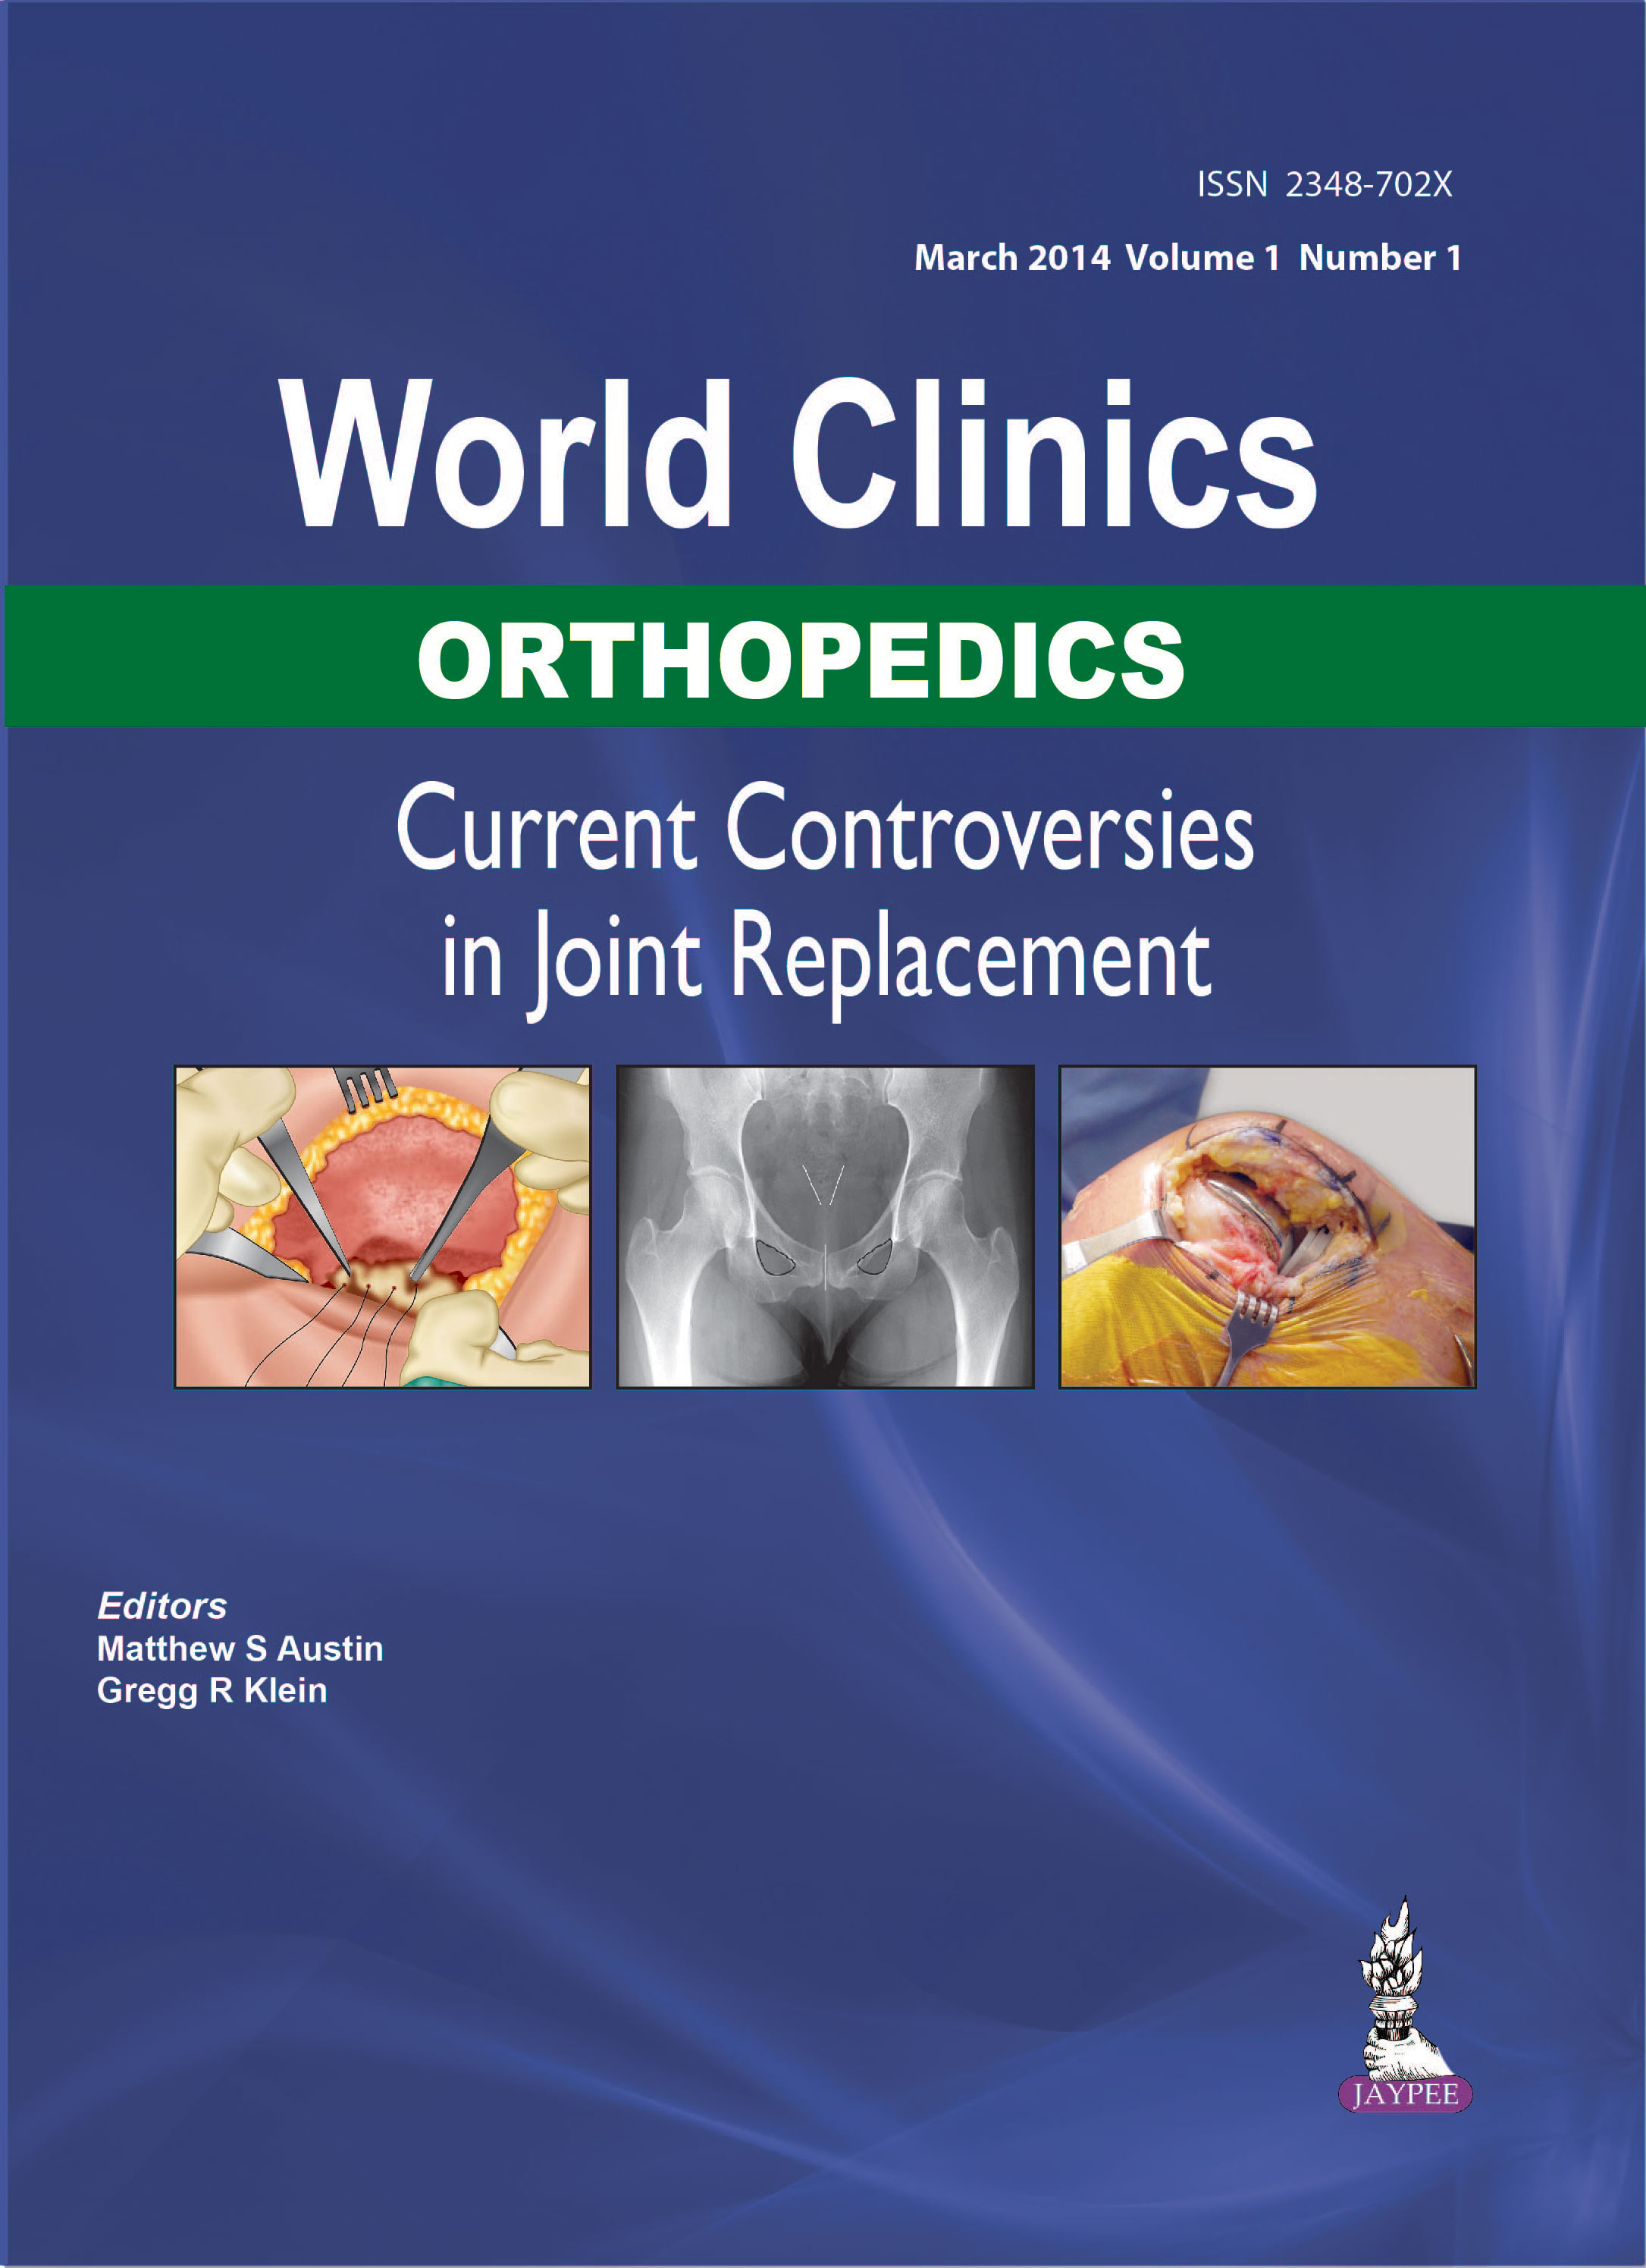 World Clinics Orthopedics : Current Controversies in Joint Replacement|Volume 1  Issue 1